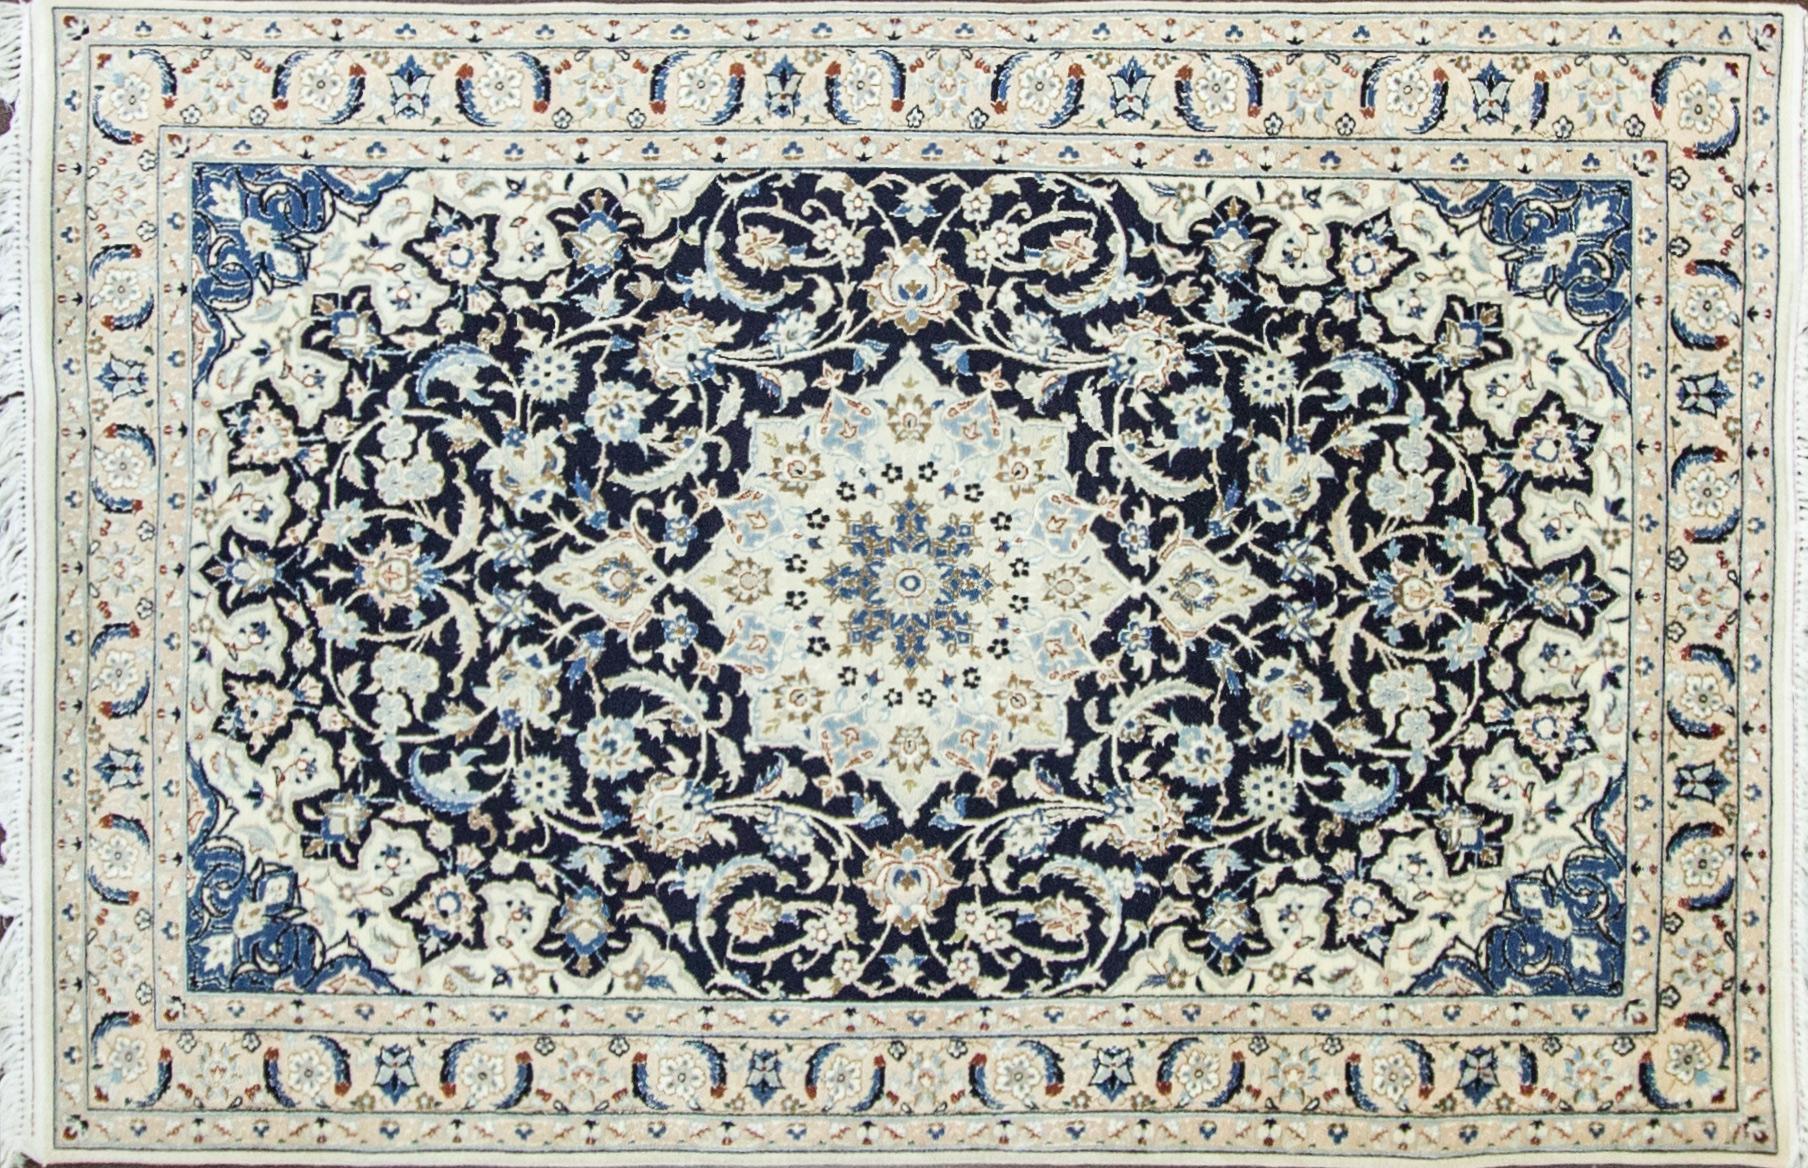 Wool and silk Persian rug.
Nain rugs are constructed using the Persian knot and typically have between 300 and 700 knots per square inch. The pile is usually very high quality wool, clipped short, and silk is often used as highlighting for detail in